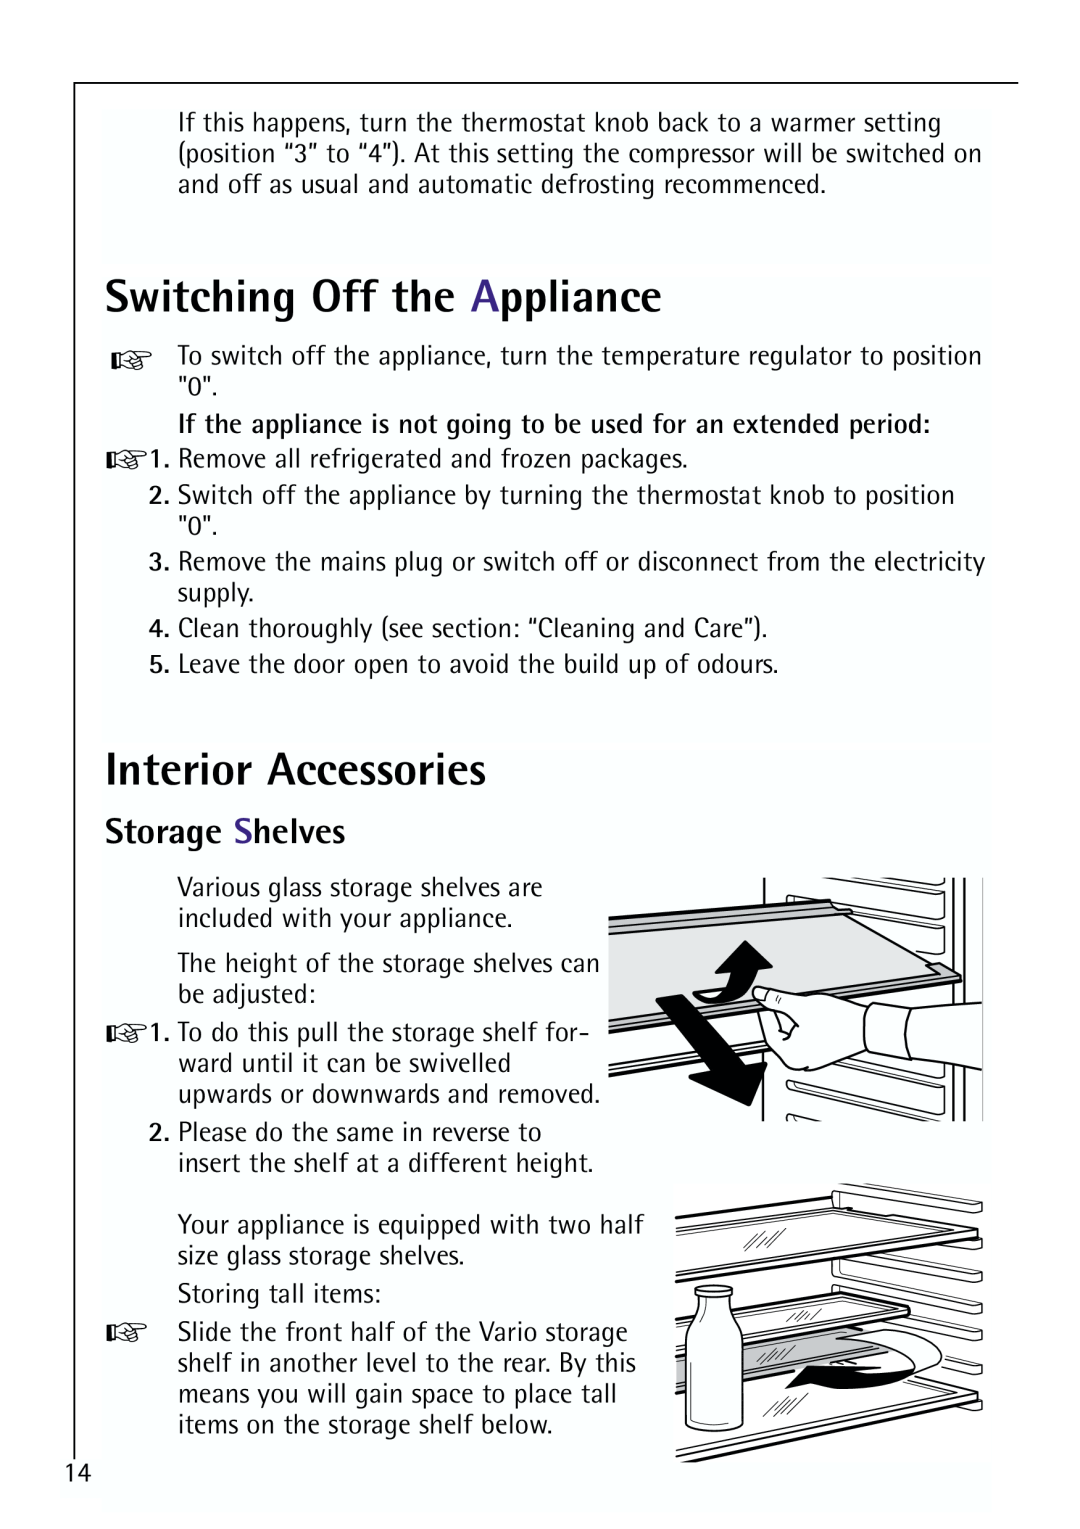 Electrolux 64150 TK manual Switching Off the Appliance, Interior Accessories, Storage Shelves 